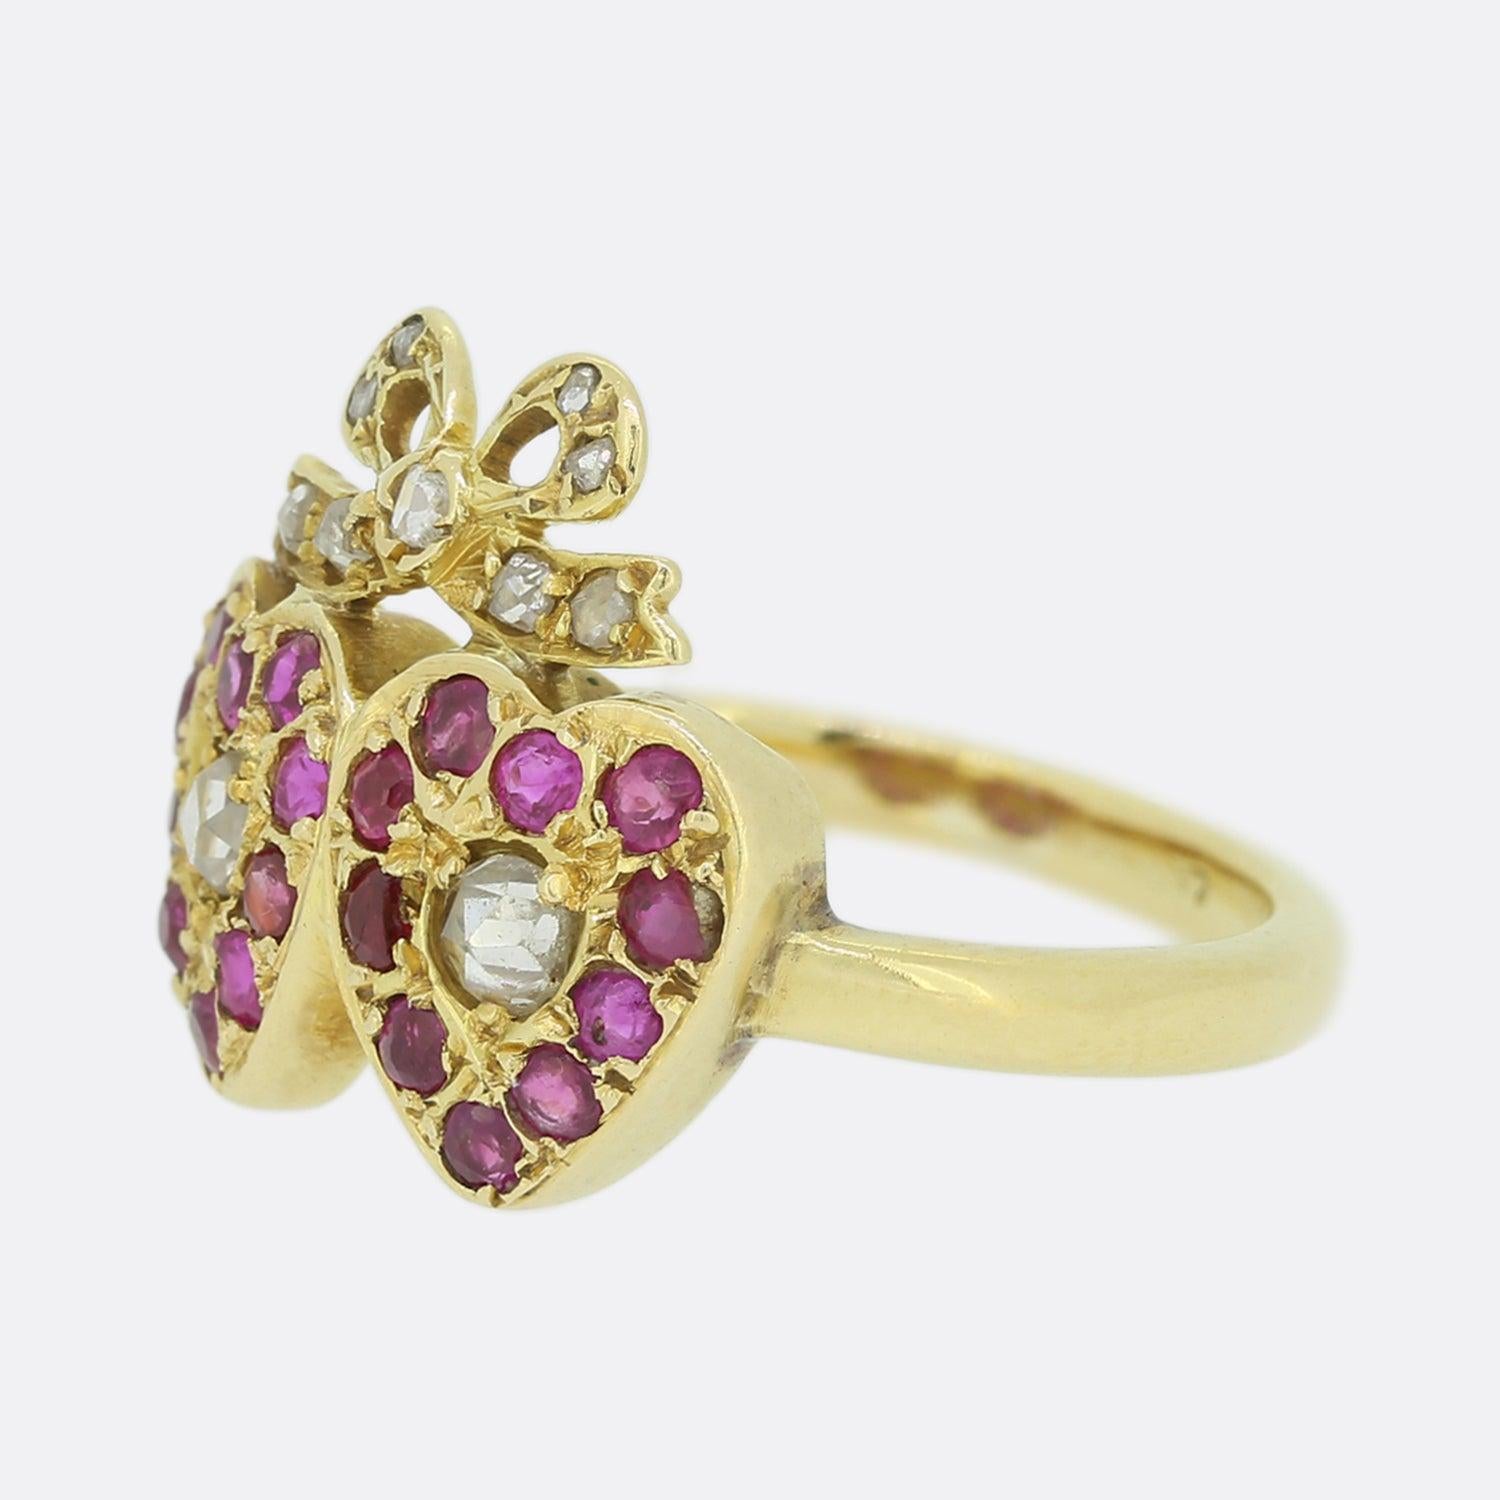 This is an 18ct yellow gold ring that dates back to the Edwardian era. The centre of each heart is set with a rose cut diamond that is bordered by rich red rubies. Above the hearts there is a diamond set bow.

Condition: Used (Very Good)
Weight: 4.5